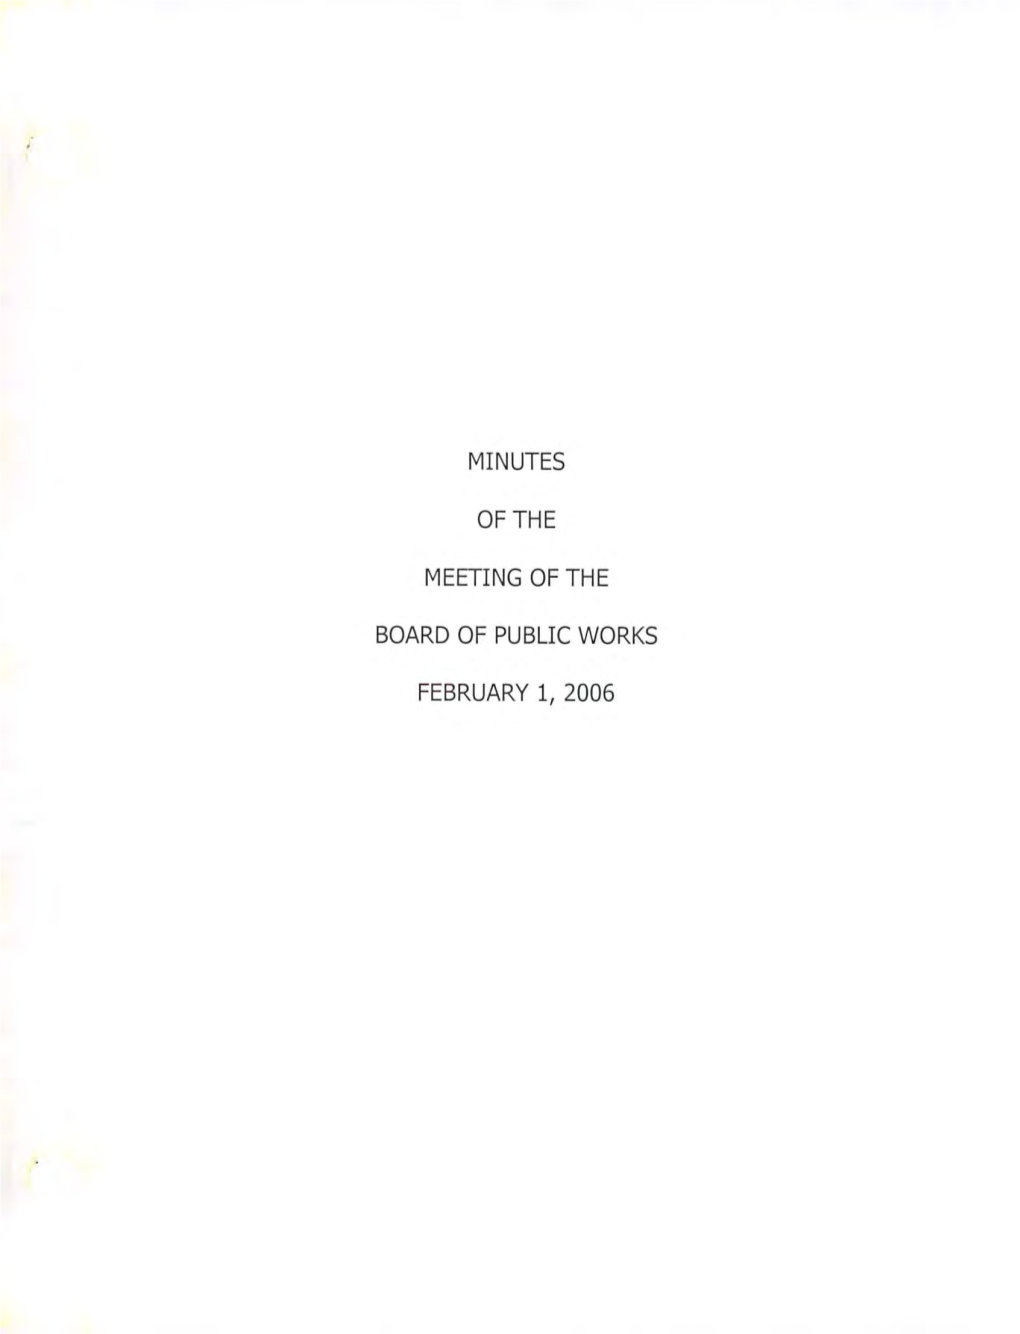 Minutes of the Meeting of the Board of Public Works, February I, 2006